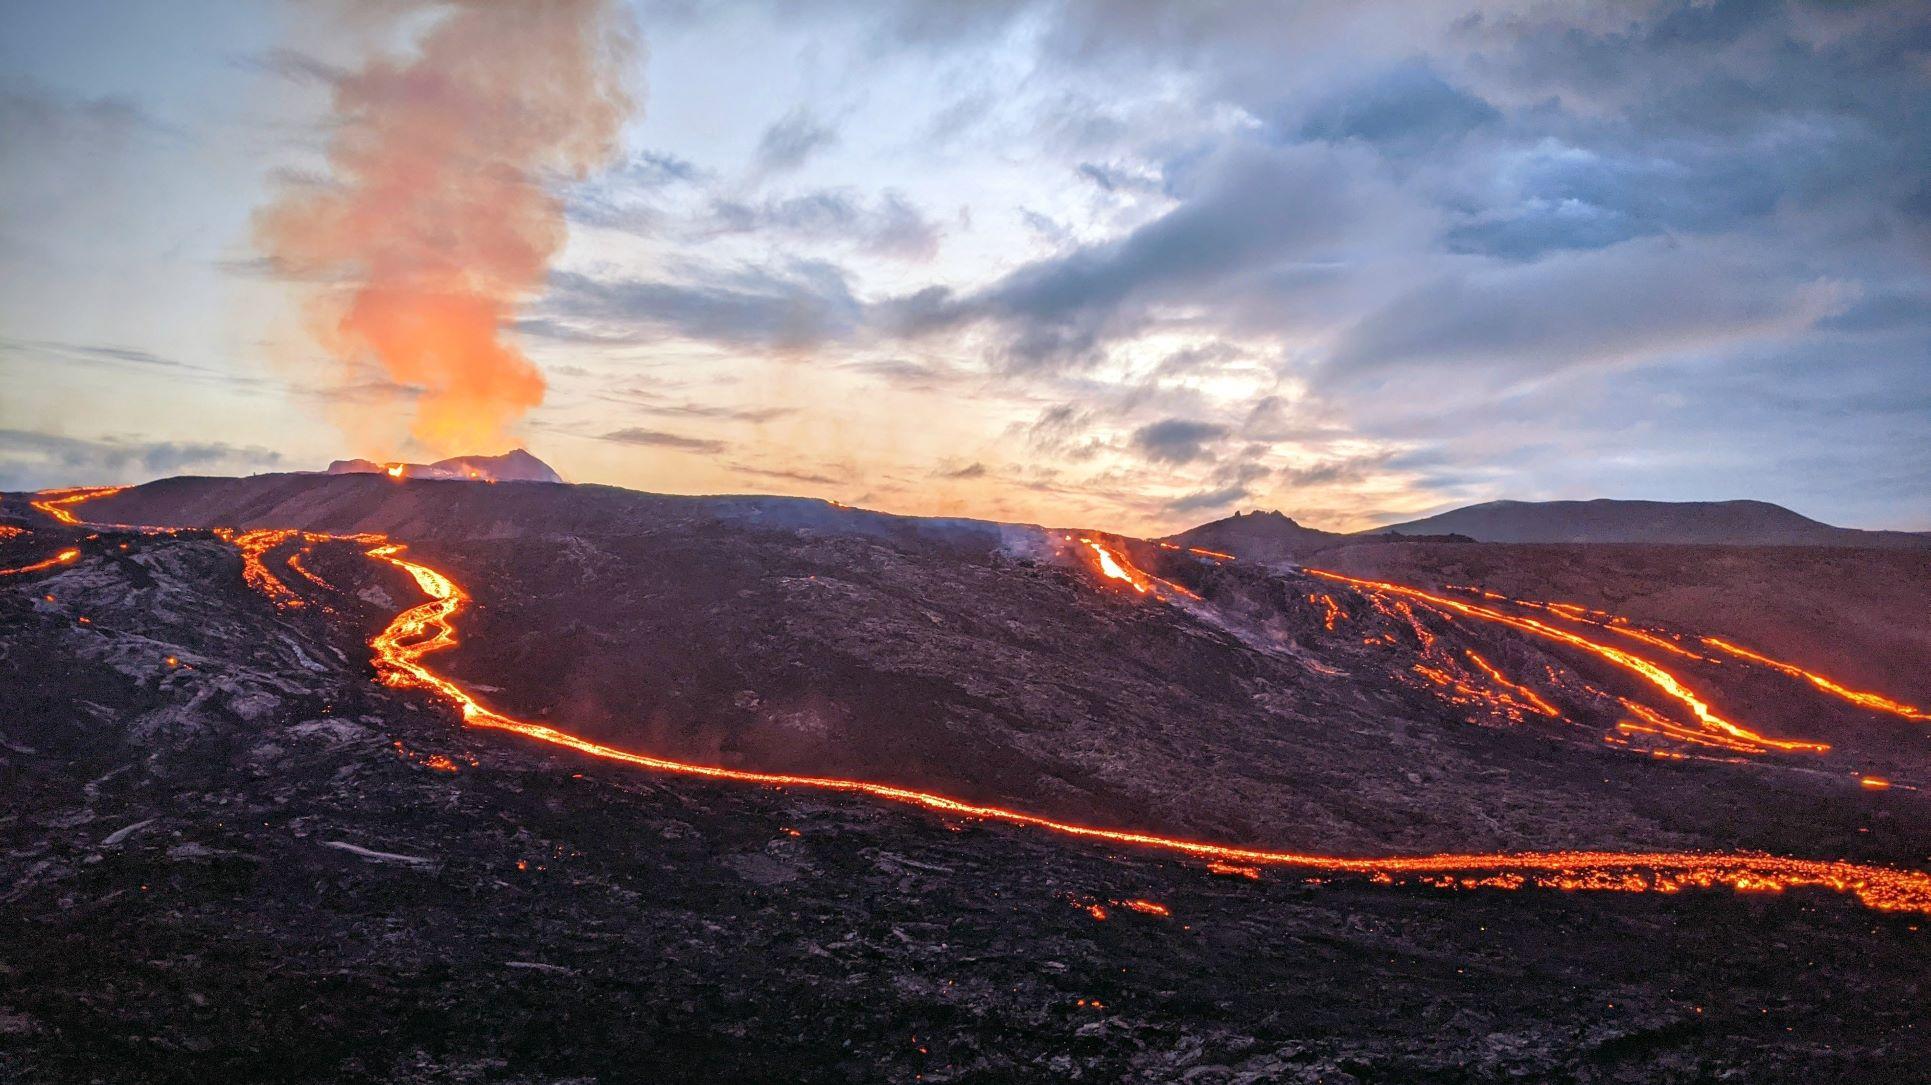 Photo of lava flowing from volcano in evening